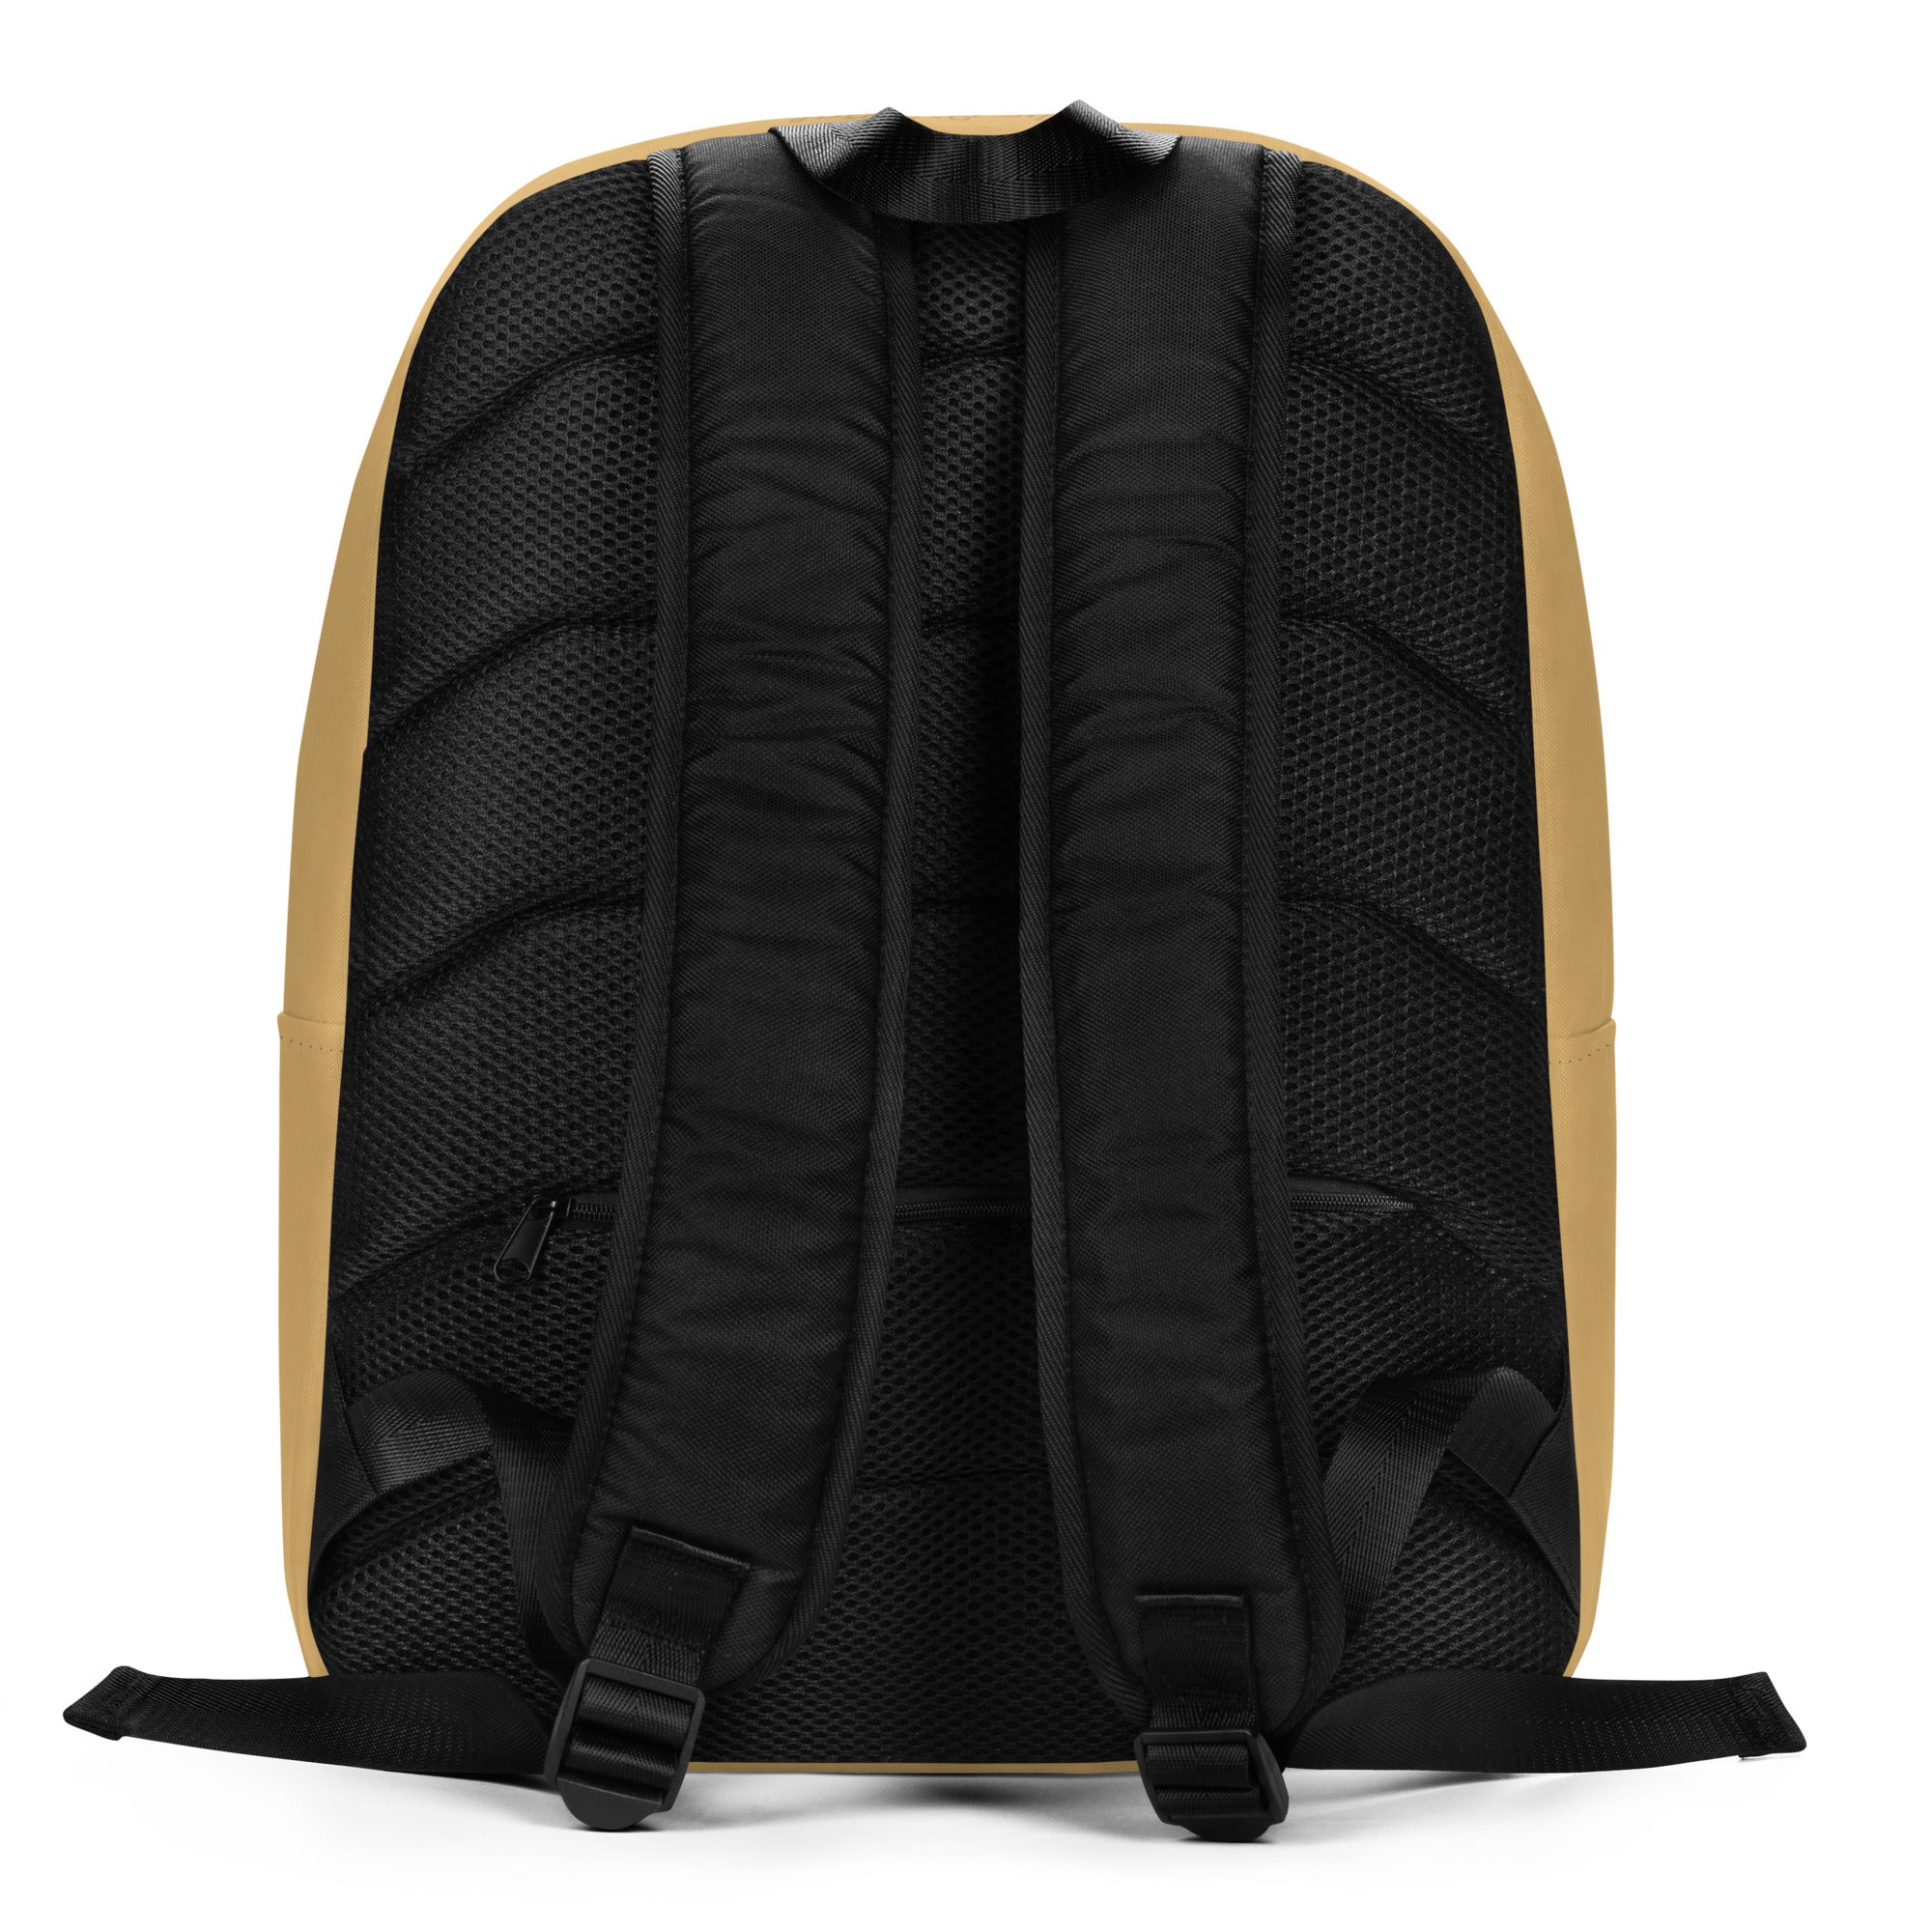 Sports Mom Minimalist Backpack - Away Game - Fawn